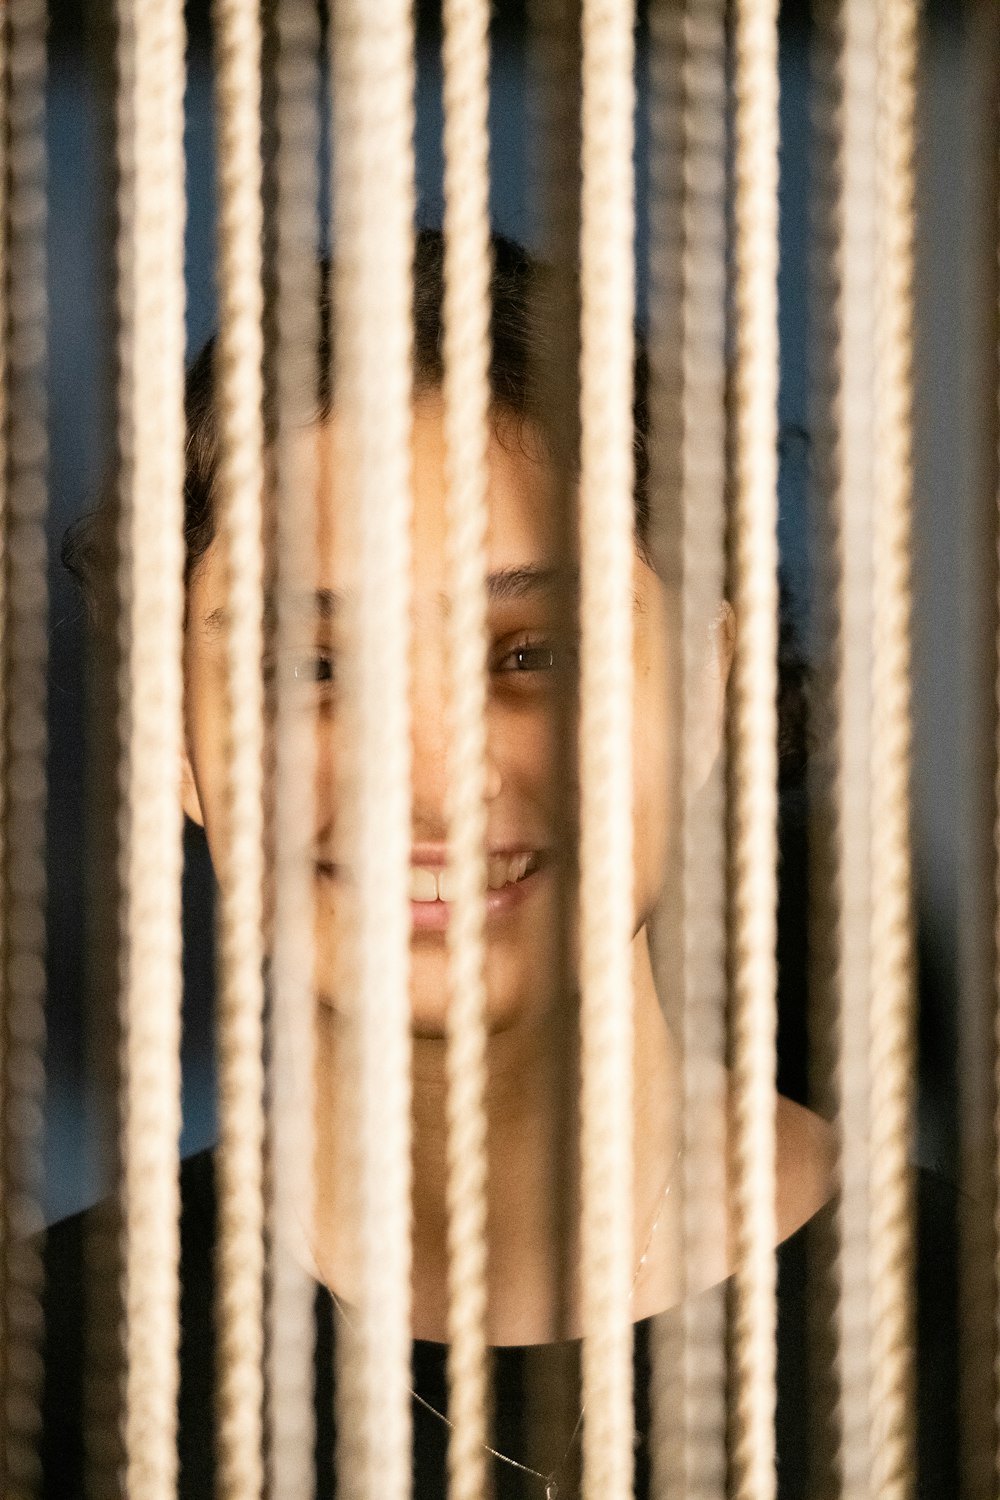 a young girl looking through the bars of a window